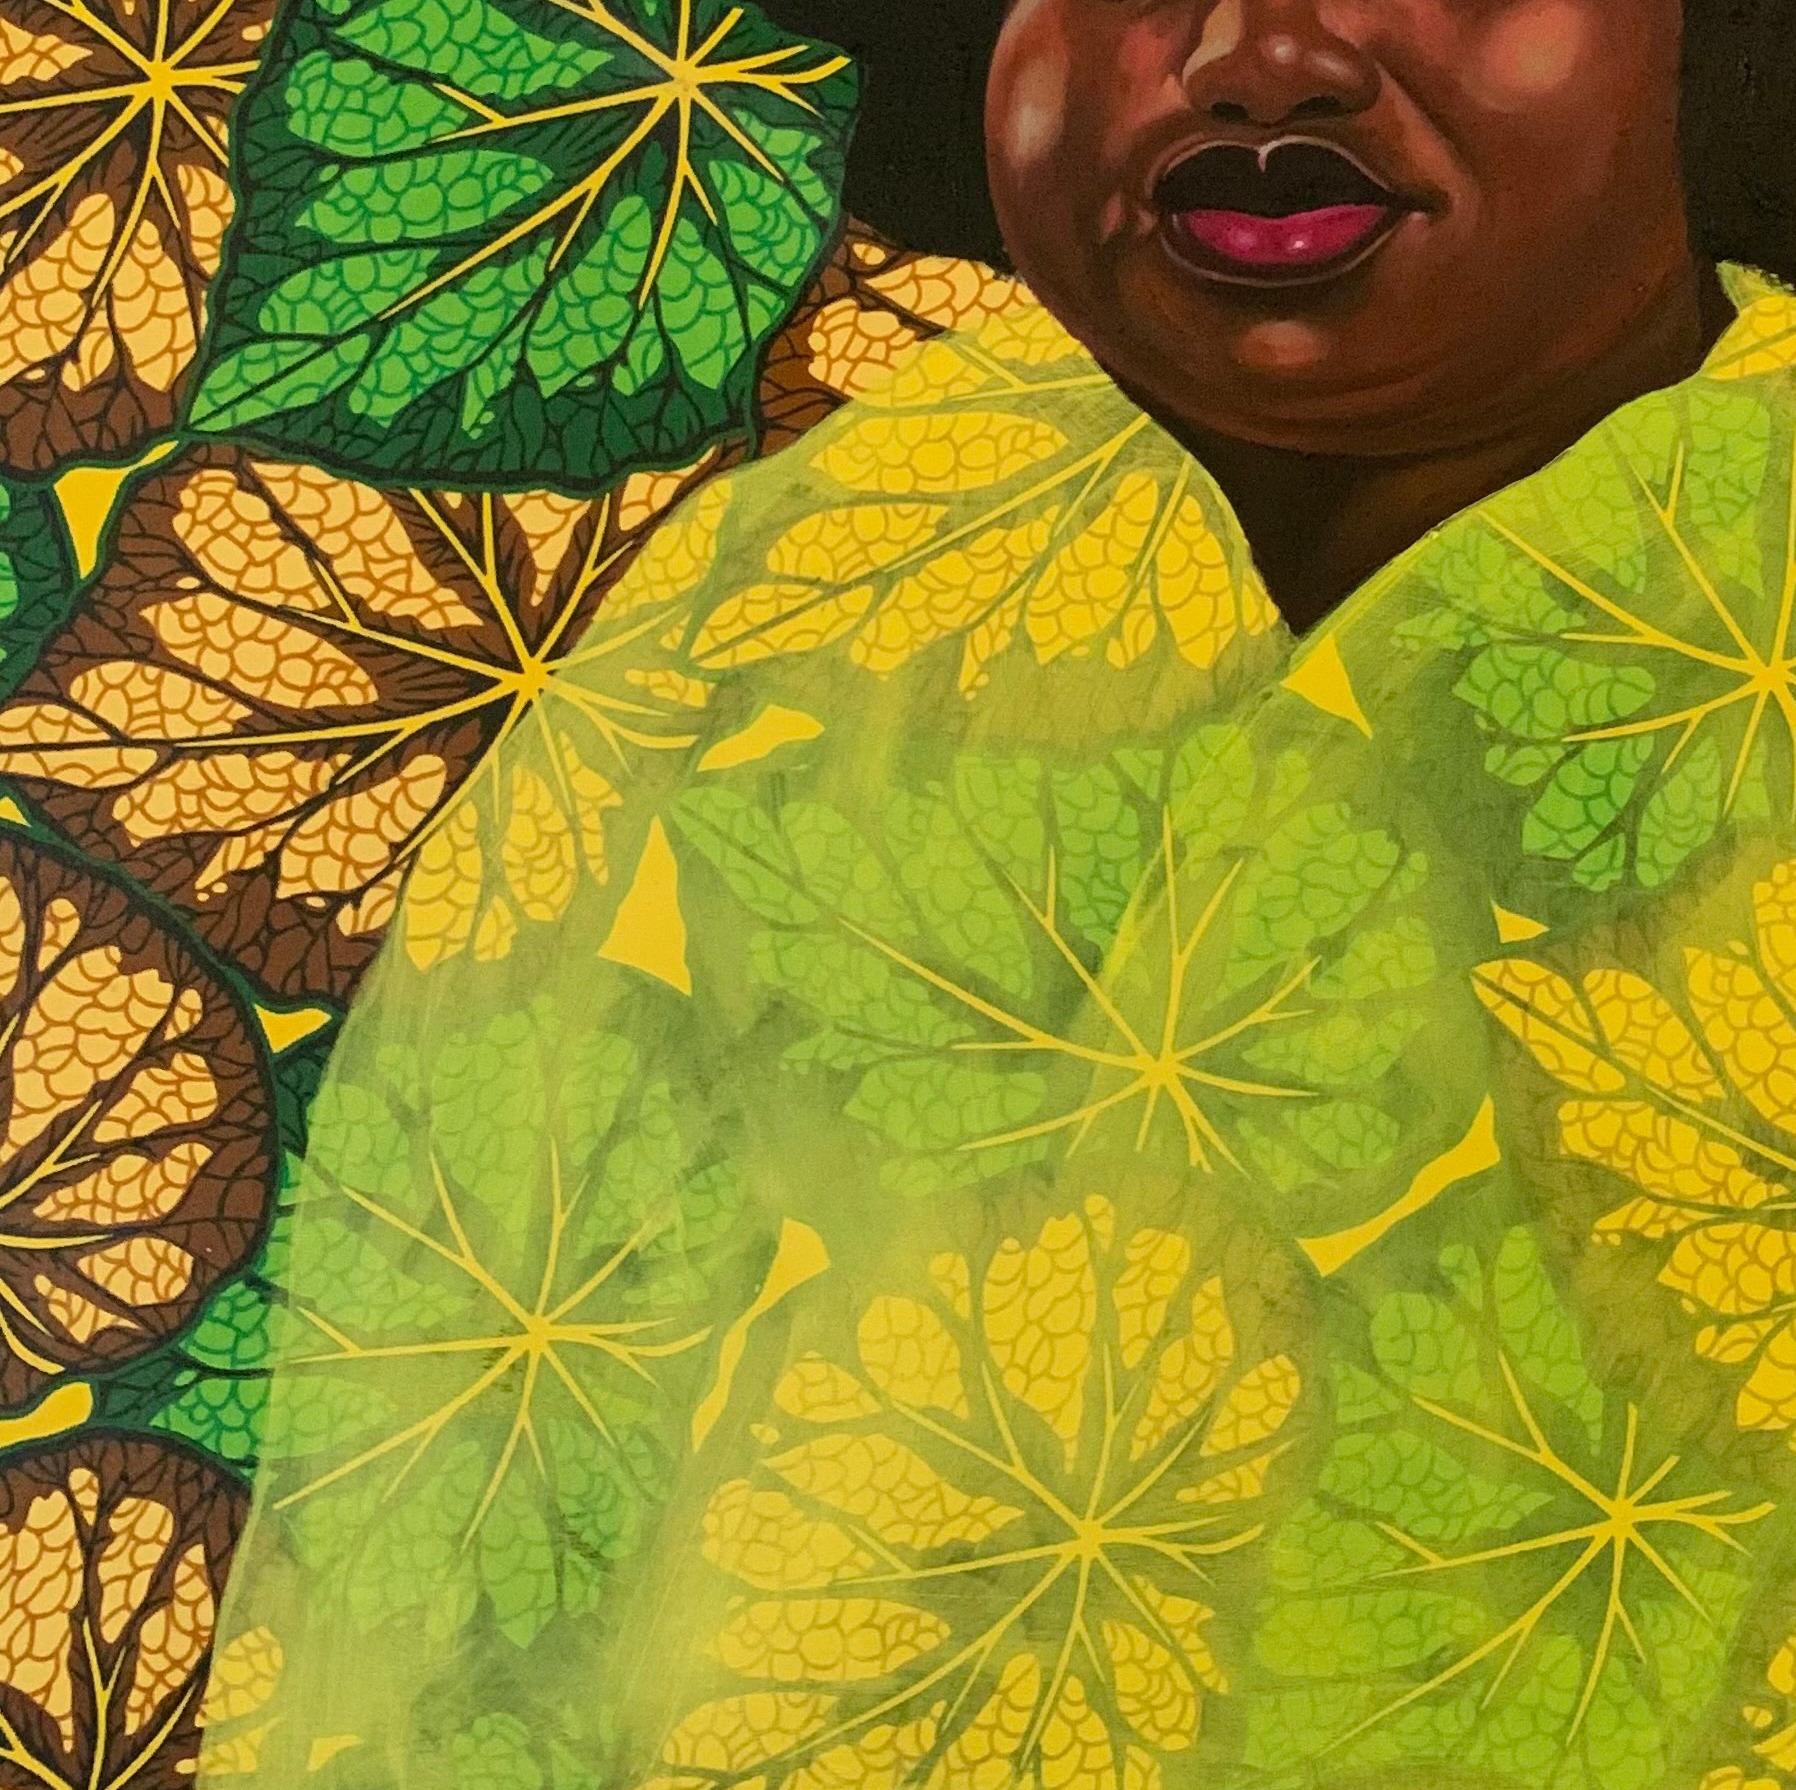 The painting is a stunning portrait of a black African woman with an intricate afro hairstyle that dominates the canvas. The use of vibrant oil colors on Ankara fabric gives the painting a rich texture and a sense of depth as if the woman is